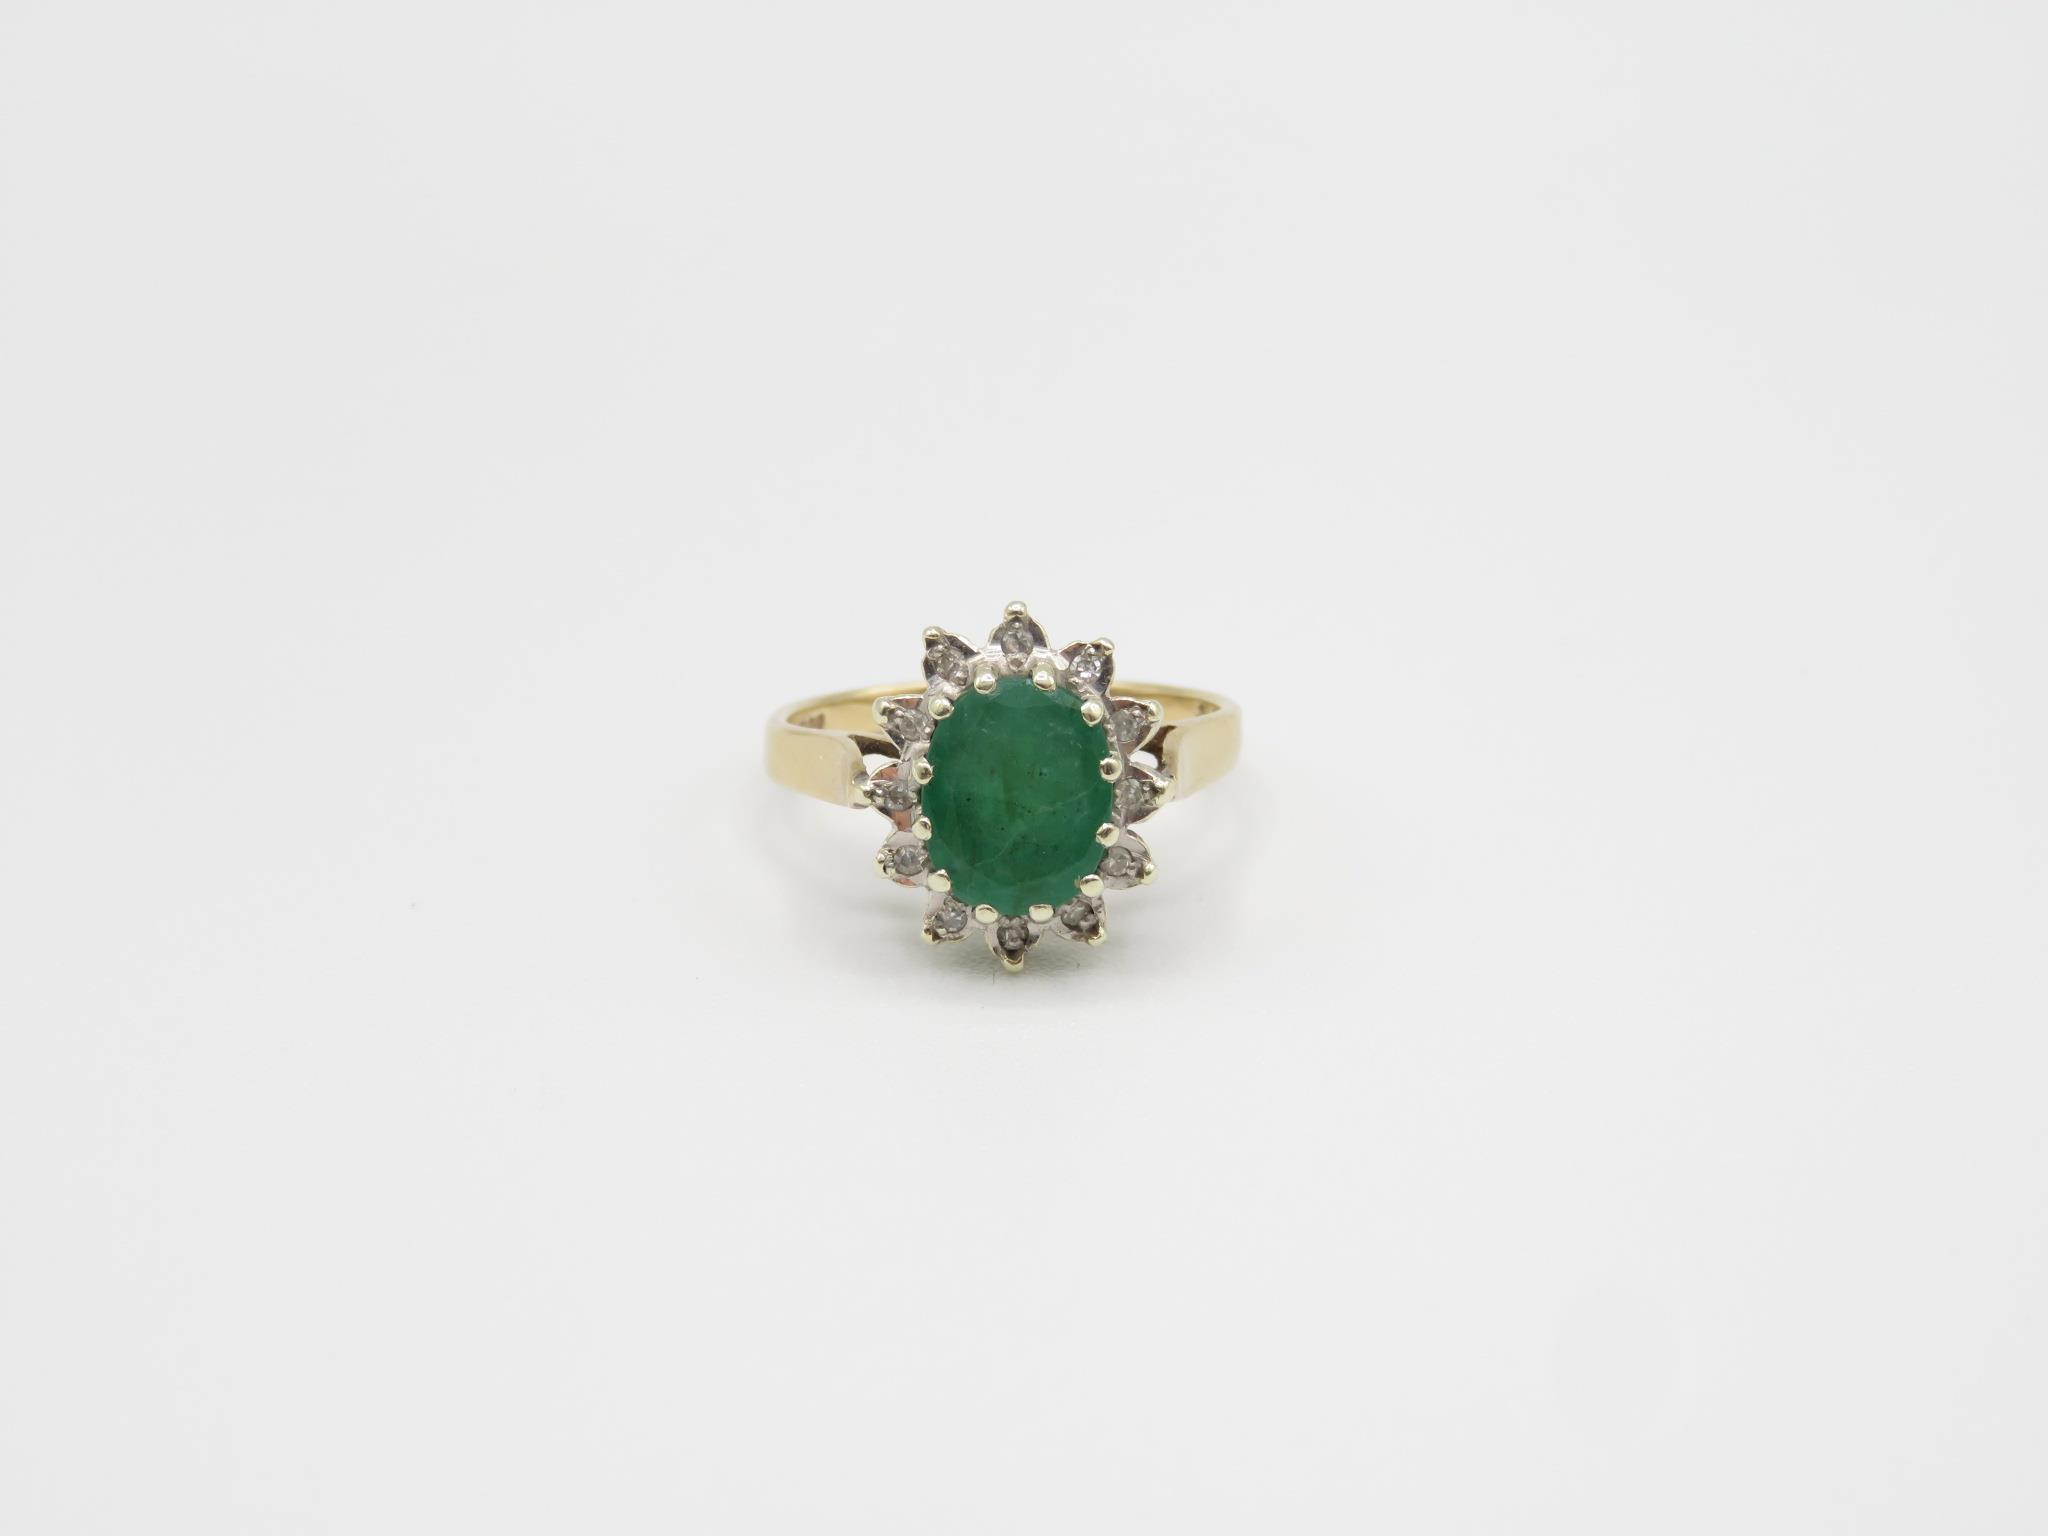 9ct Gold Oval Cut Emerald Single Stone Ring With Diamond Surround (3.2g) Size M